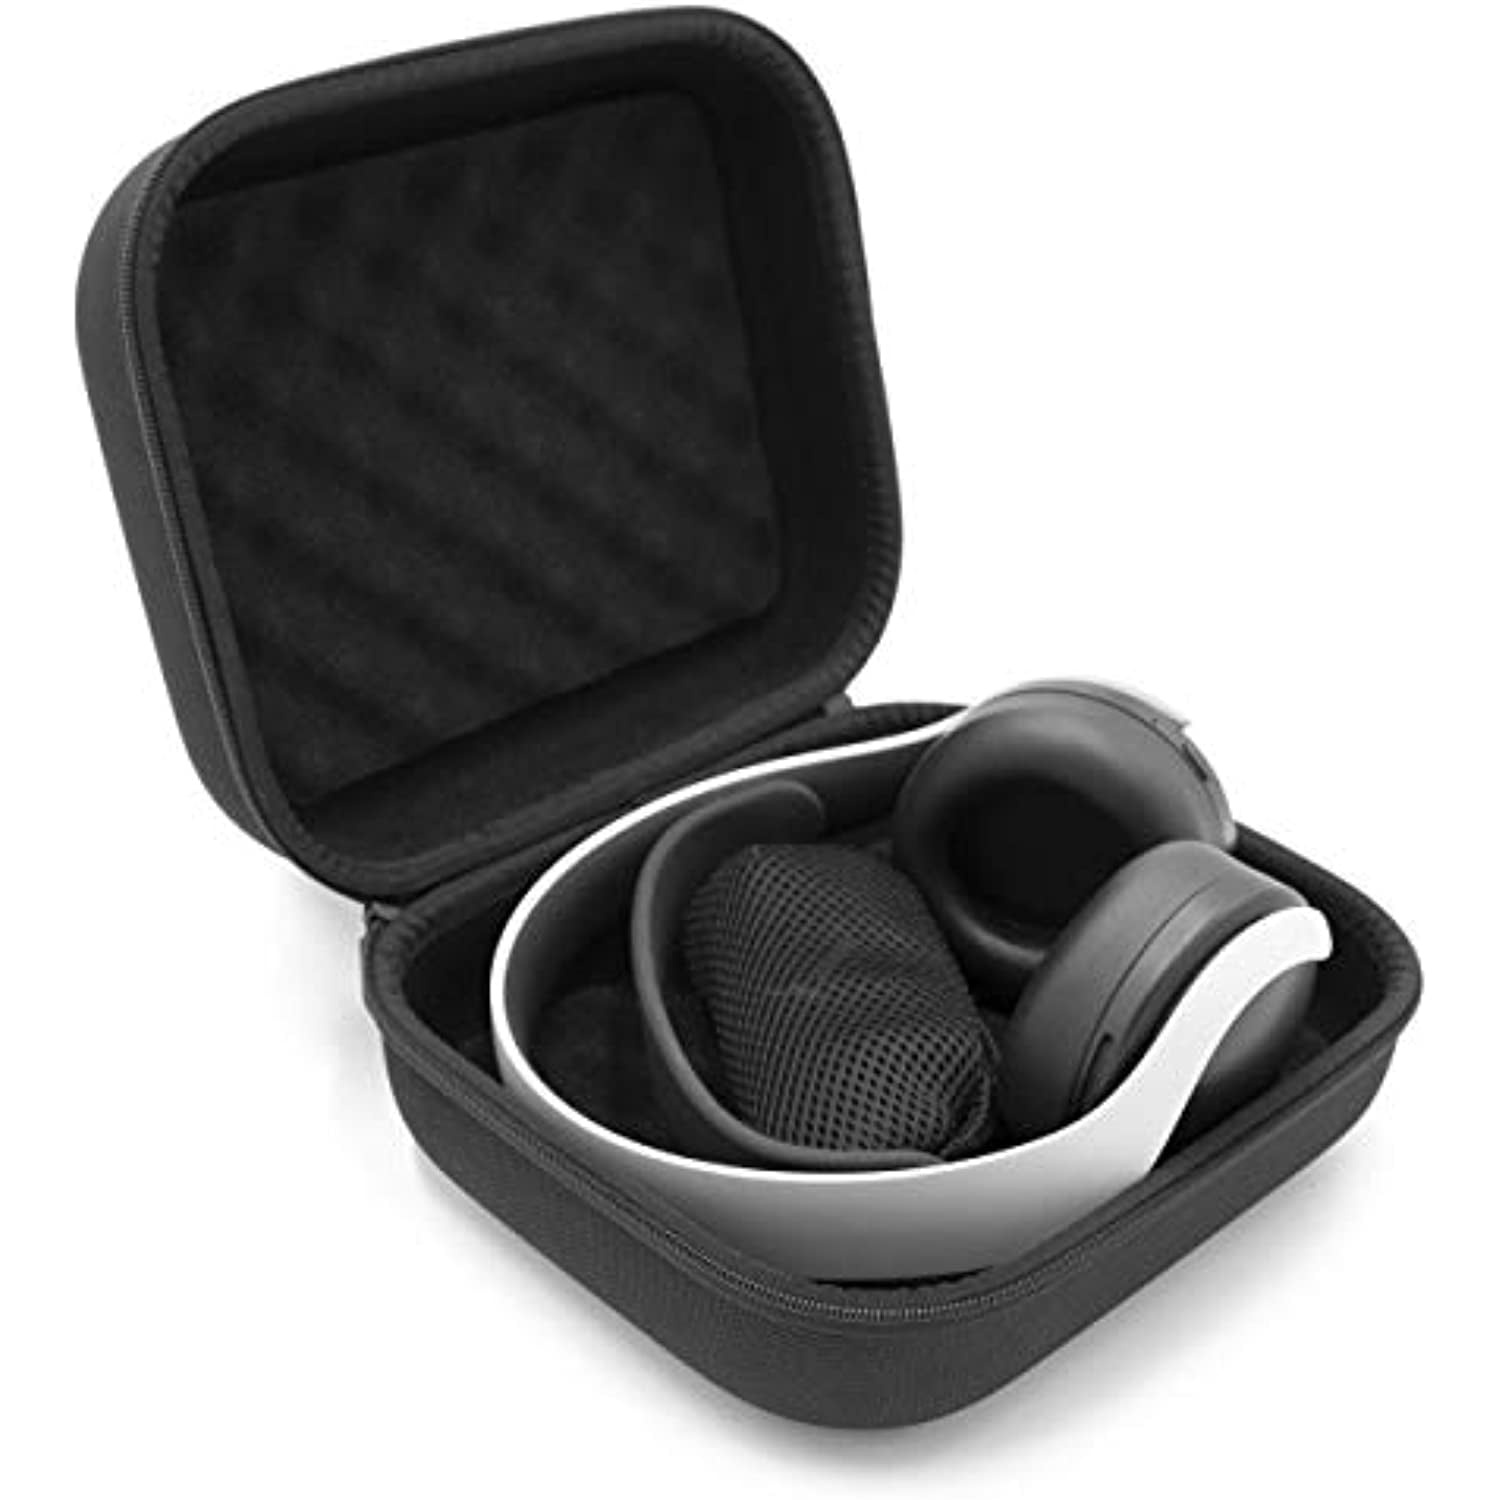 contant geld gebrek onderwijs casematix protective ps4 gaming headset case - fits playstation 4 platinum  wireless headset , dongle , cables and more - Walmart.com